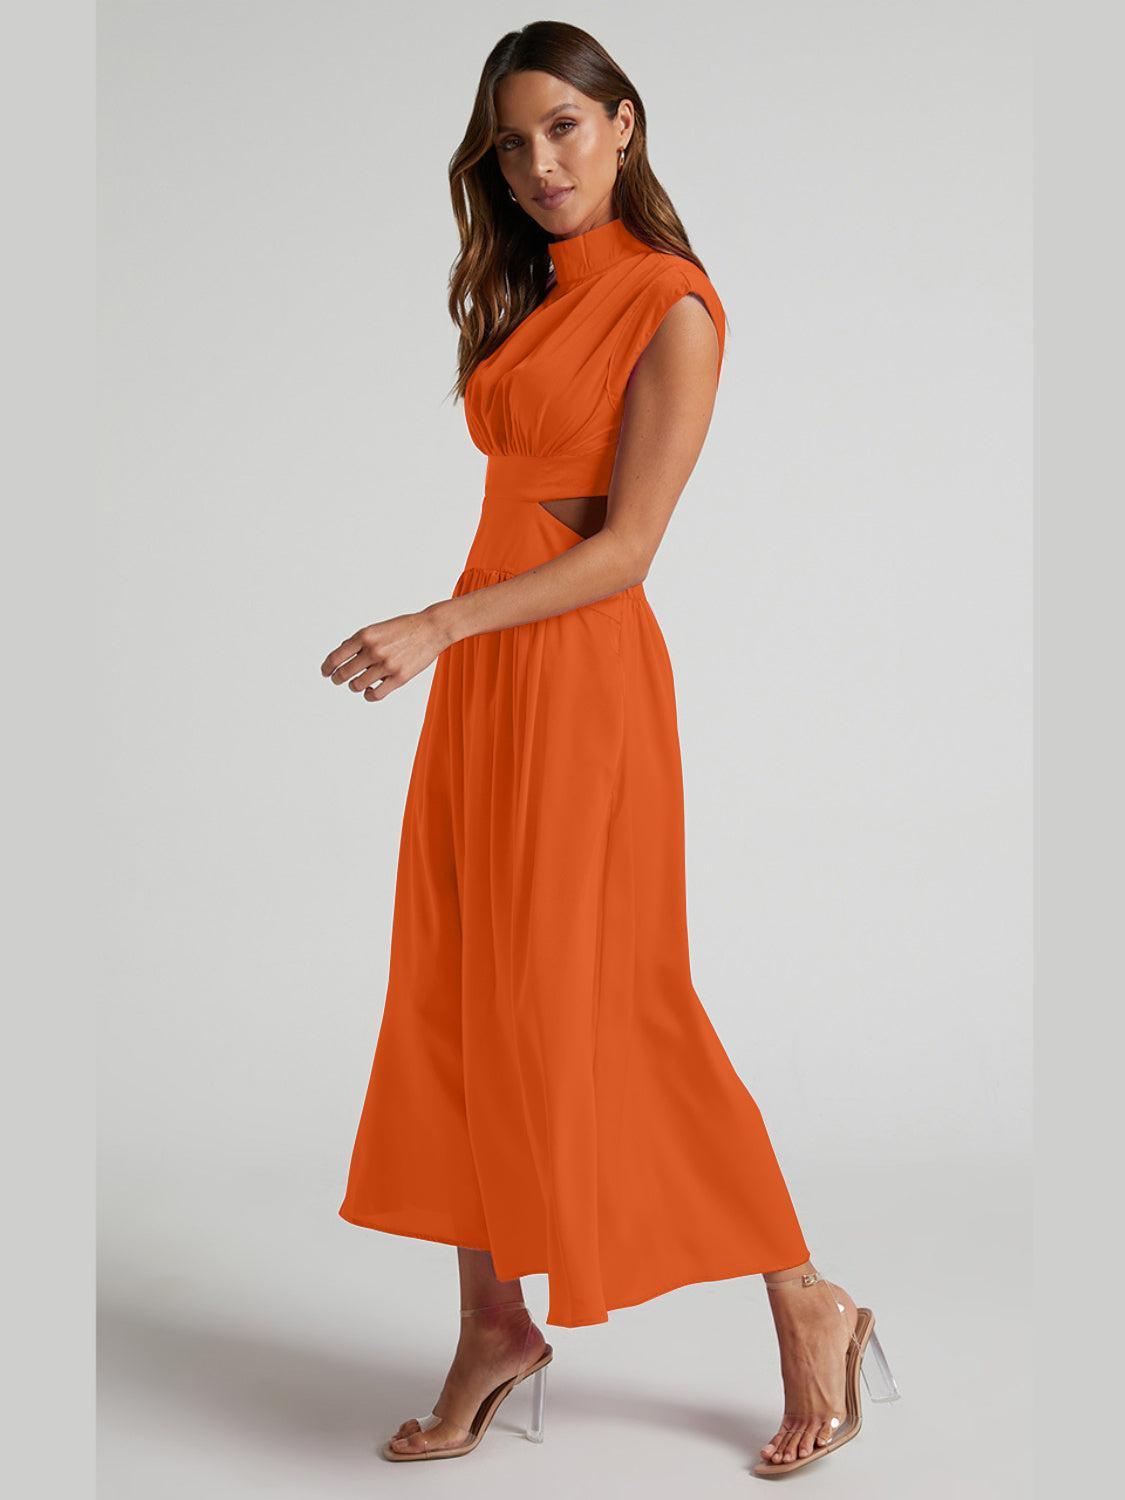 a woman in an orange dress poses for a picture